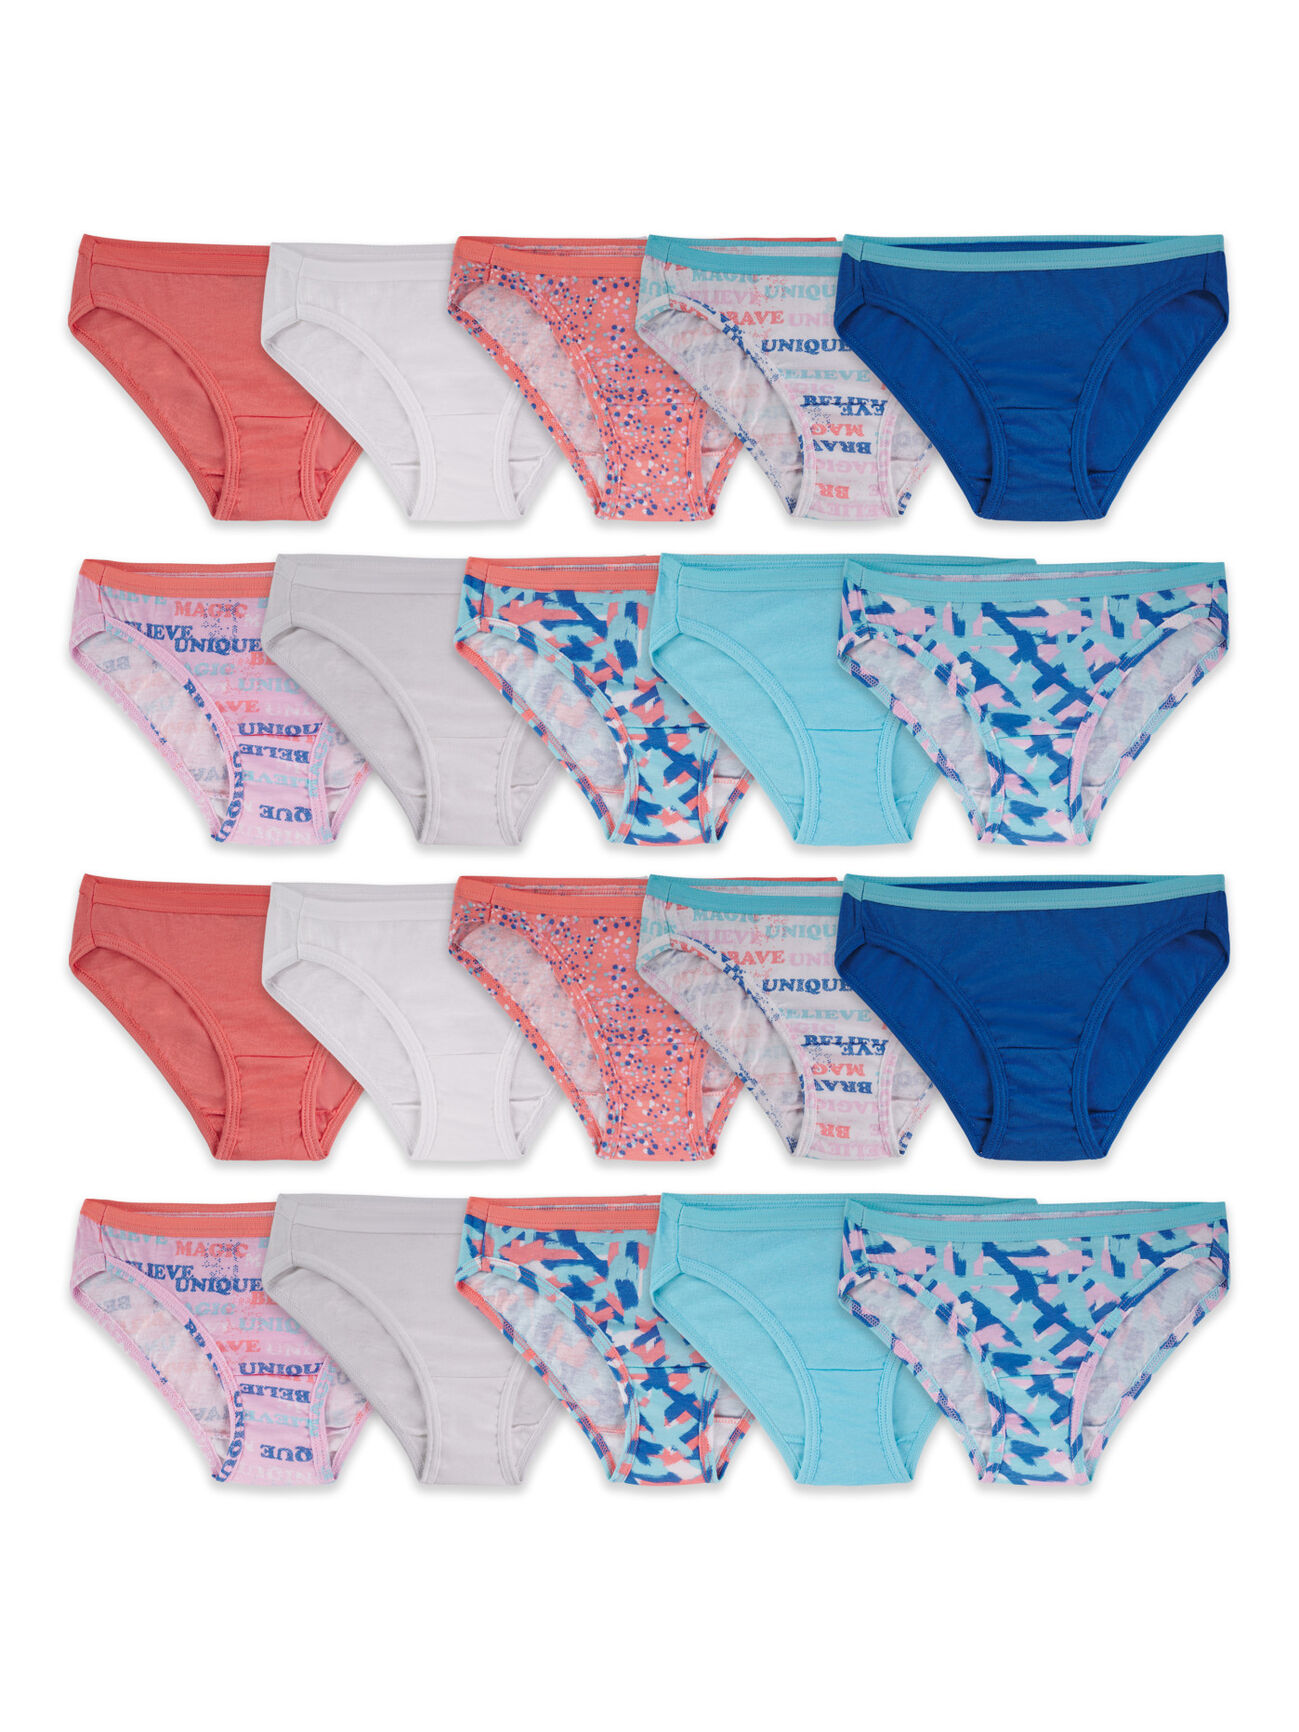 Men's assorted cotton string bikini, 5 pack - assorted color may vary 